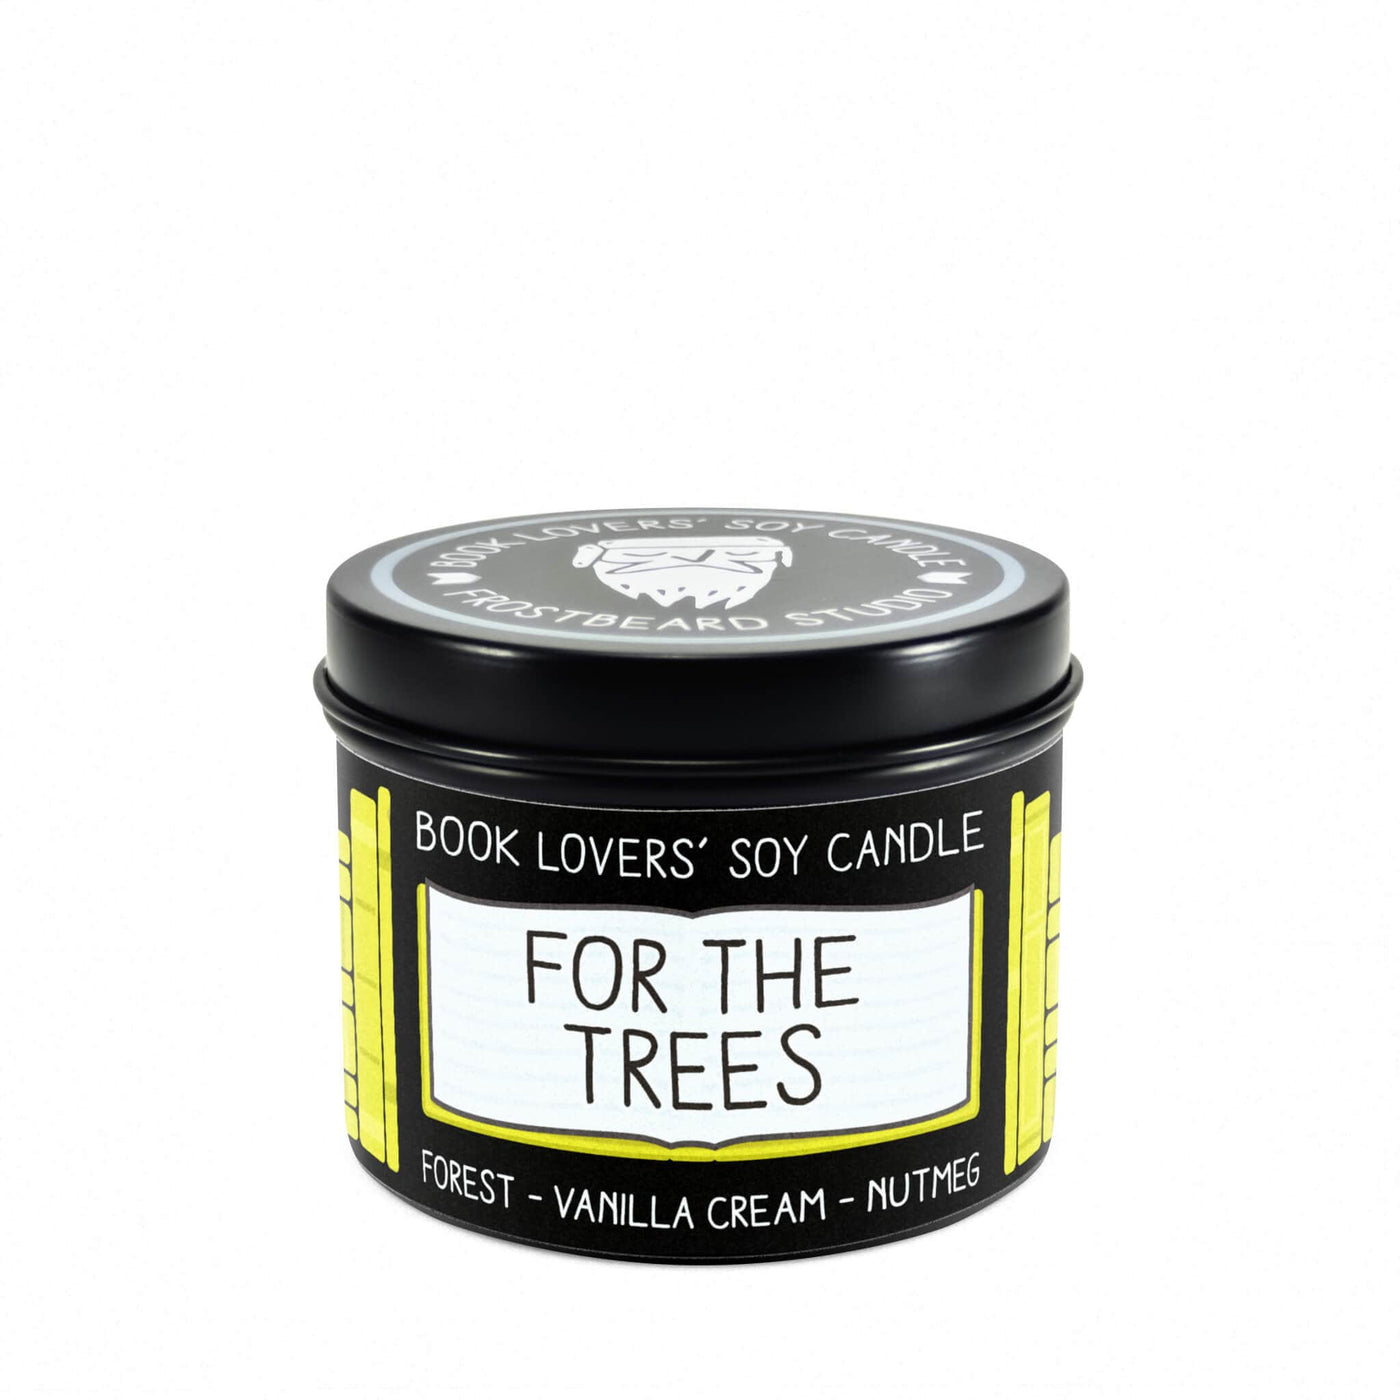 For the Trees  -  4 oz Tin  -  Book Lovers' Soy Candle  -  Frostbeard Studio